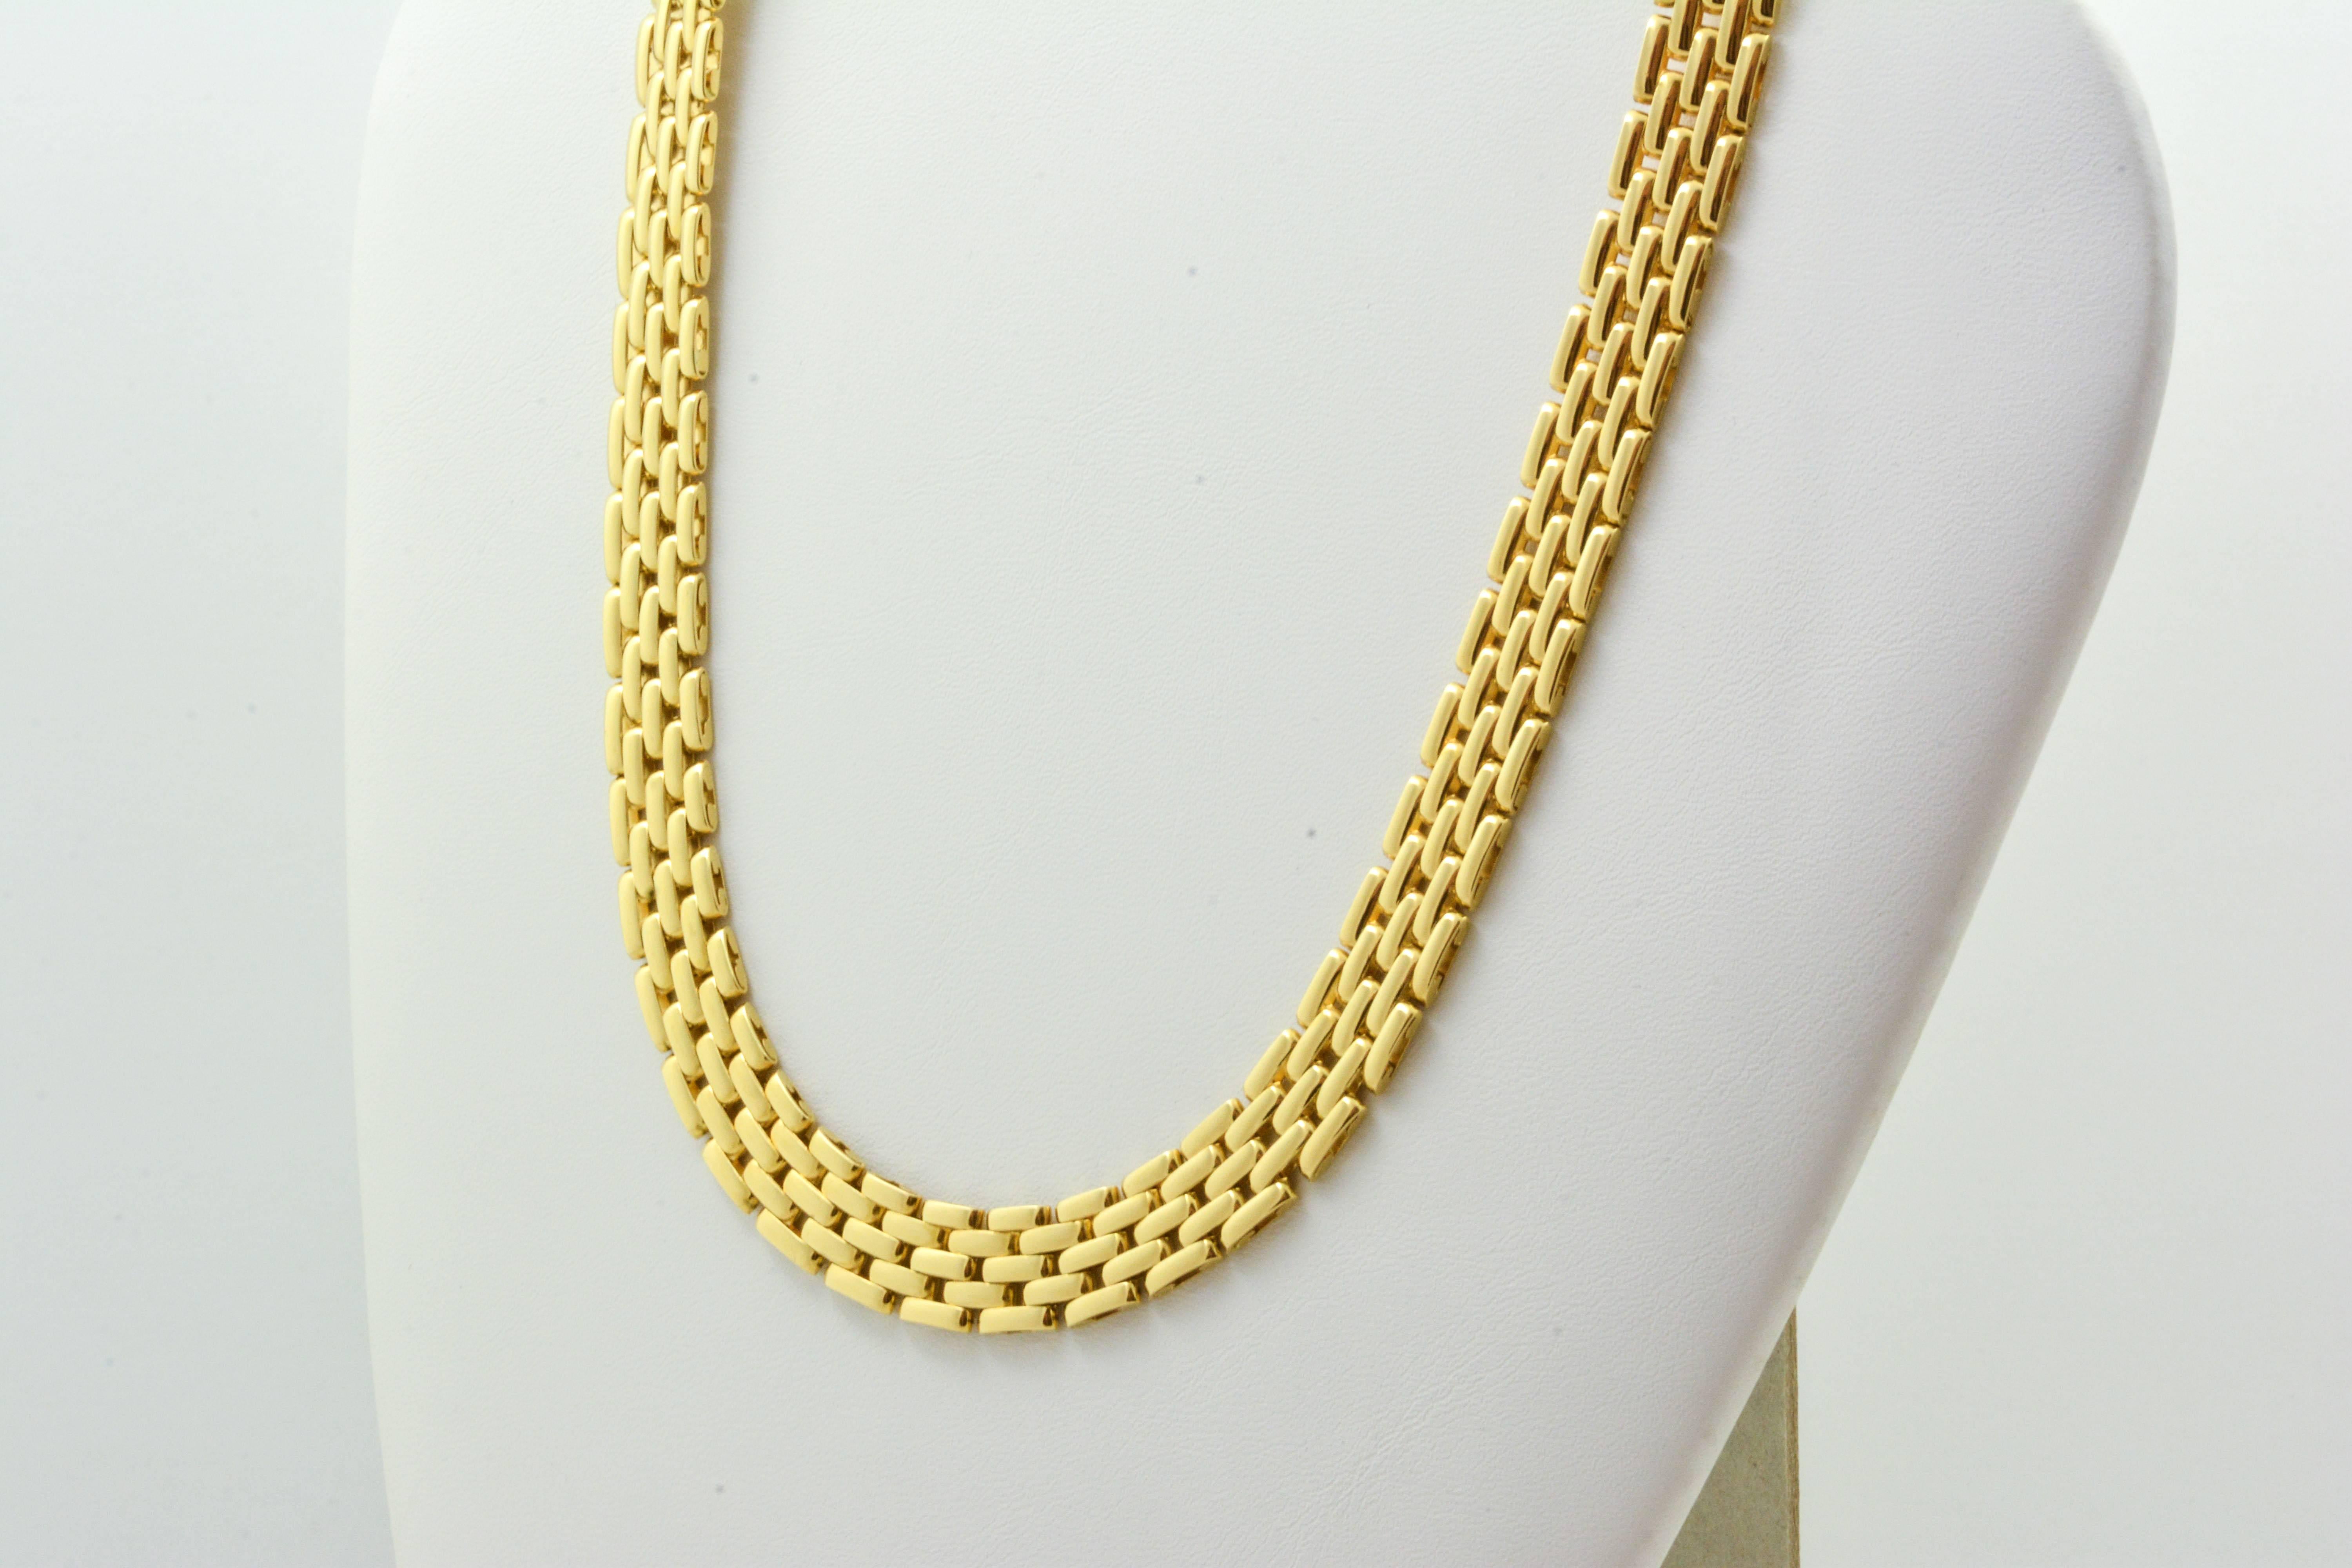 This estate 18kt yellow gold necklace is sure to be the star of any ensemble with its 10.7mm wide five brick stack links and its high polish finish. Measuring 16.5in long, this necklace clasps with a hidden box and tongue clasp, keeping its style